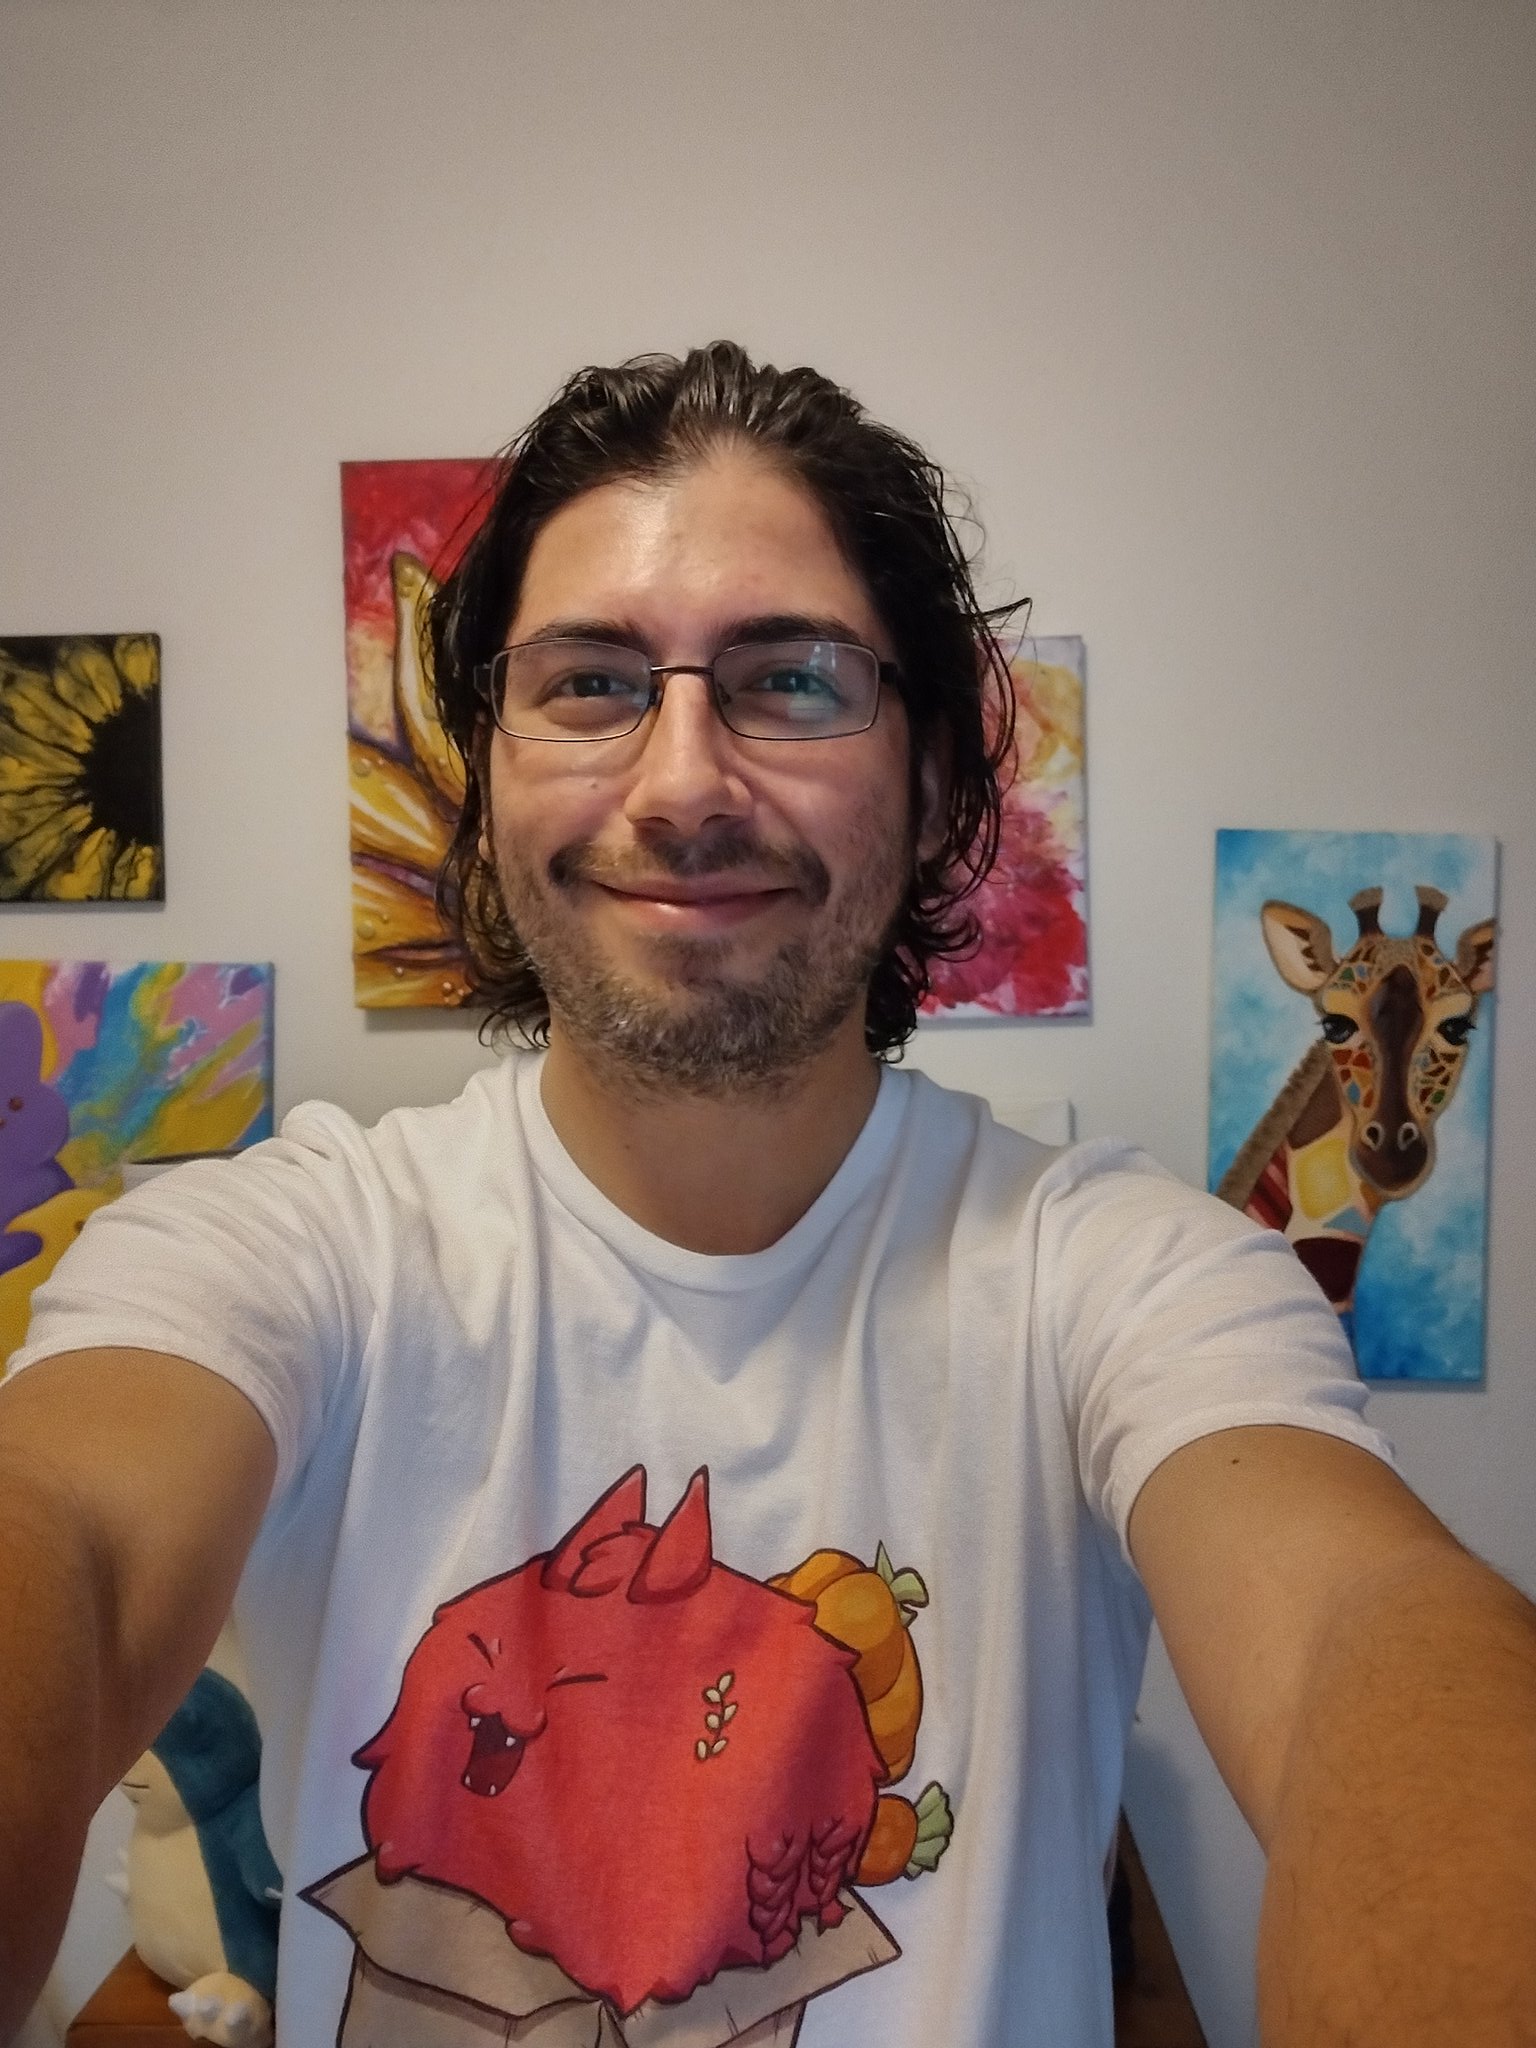 RT AxieNoob: @AxieArtGallery #Axieselfiecontest #AxieMondaySelfie Repping the @BigYakAxieClub with this beautiful T-shirt by the talented @GhazelfCarrot 🤗 [twitter.com] [pbs.twimg.com]